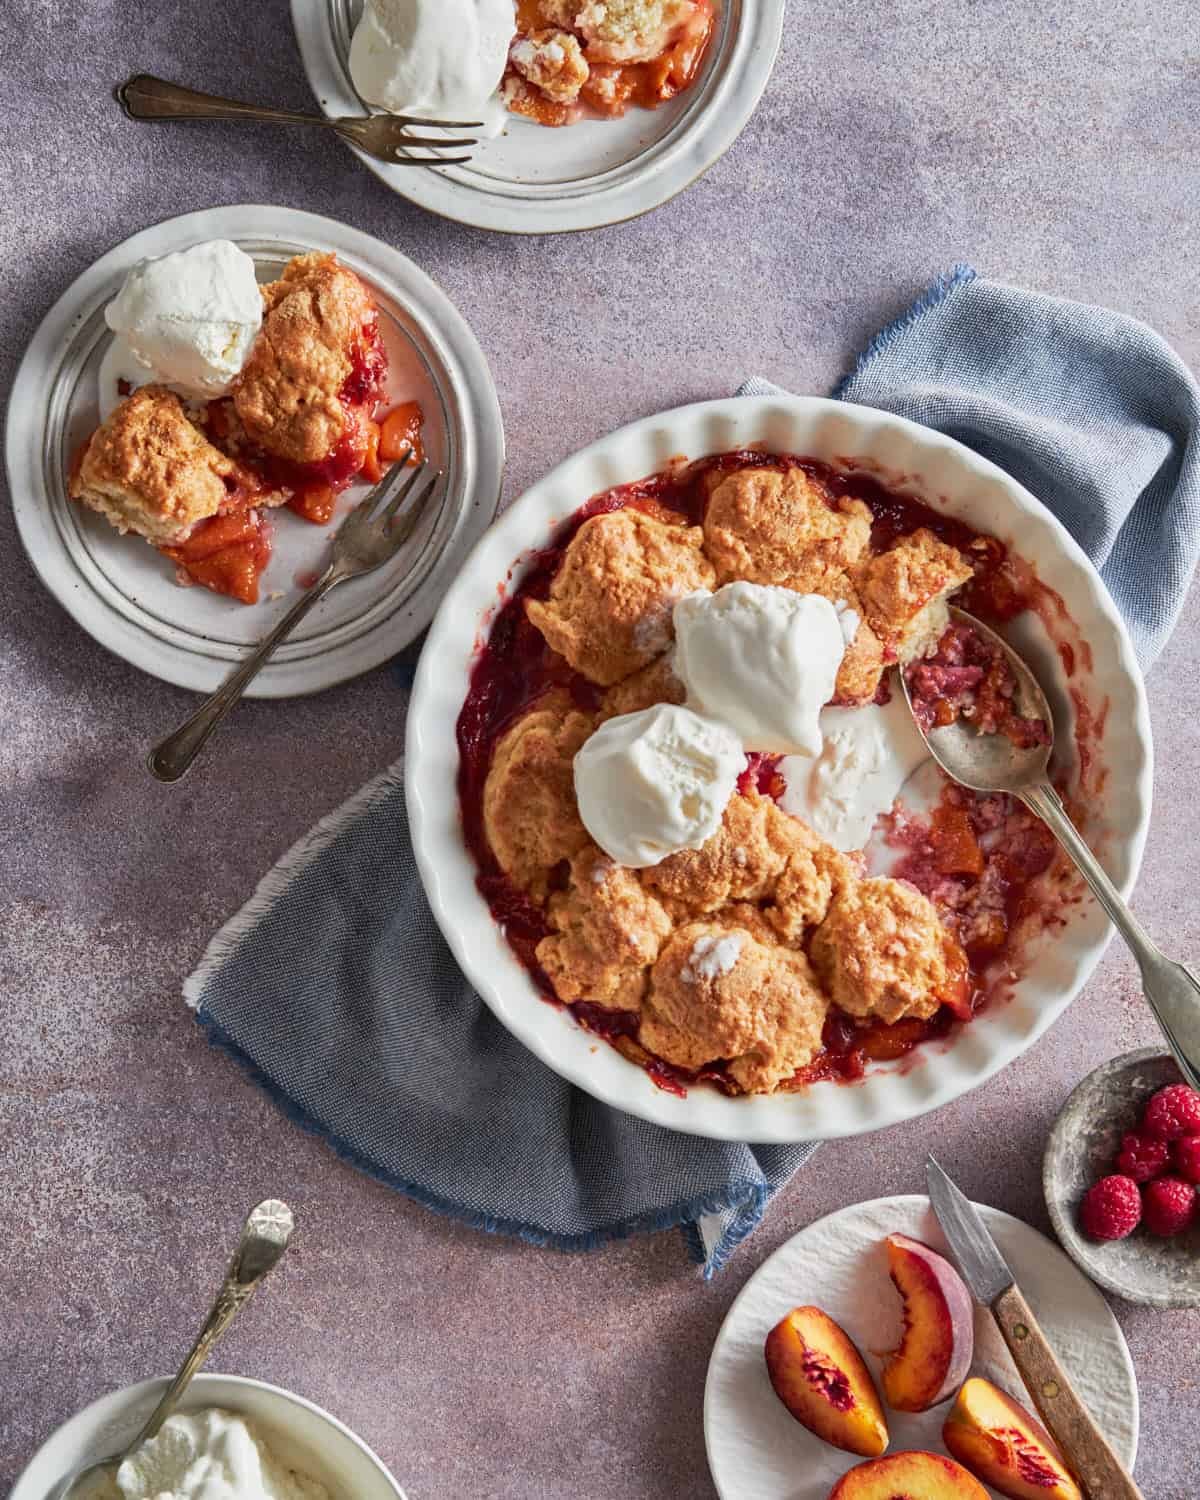 Peaches and Raspberries Cobbler in the baking tray and slices in plates served with ice-cream. Peaches and Raspberries aside.